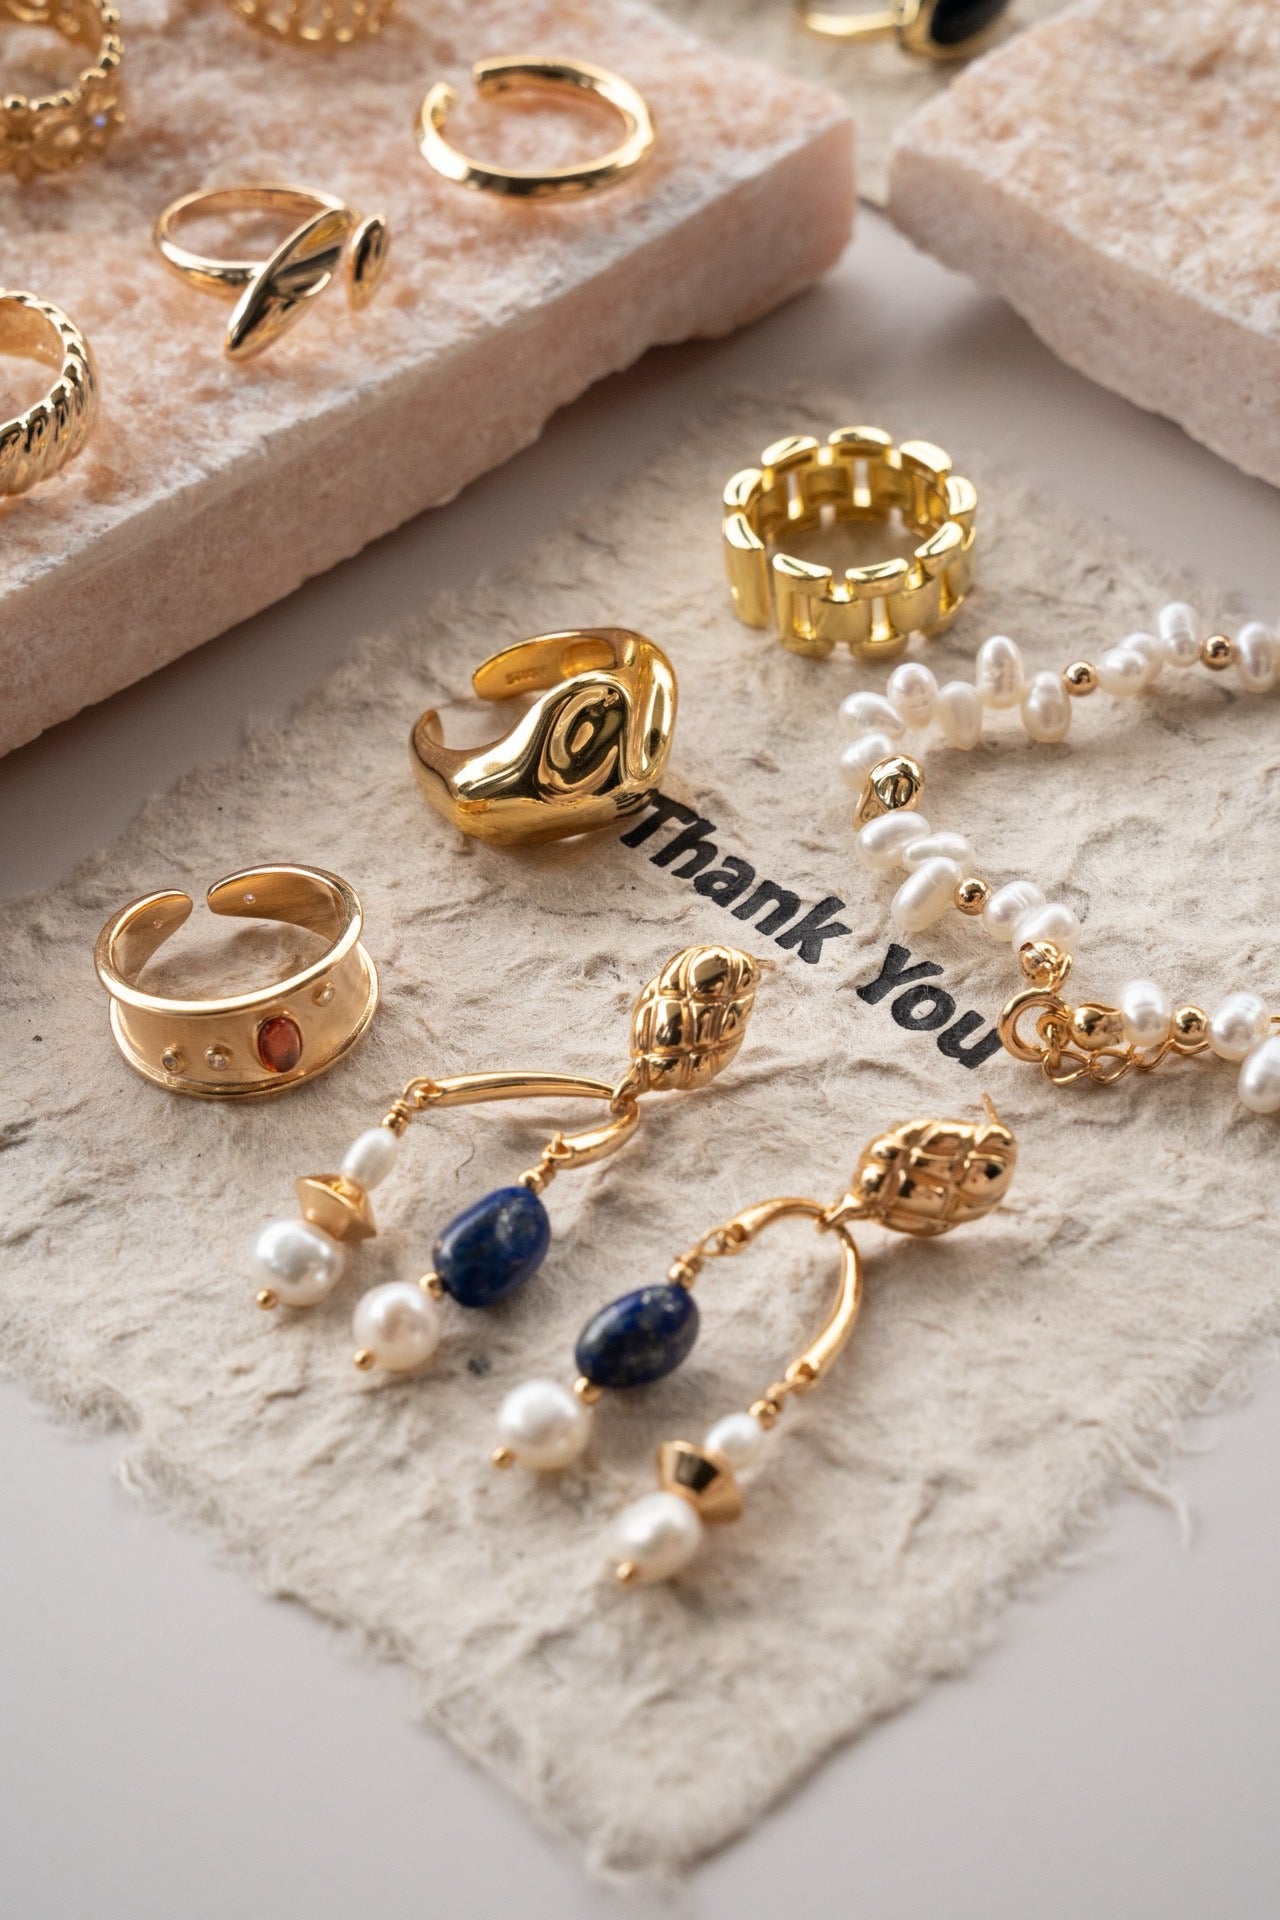 HOW TO MATCH JEWELRY FOR FALL & WINTER